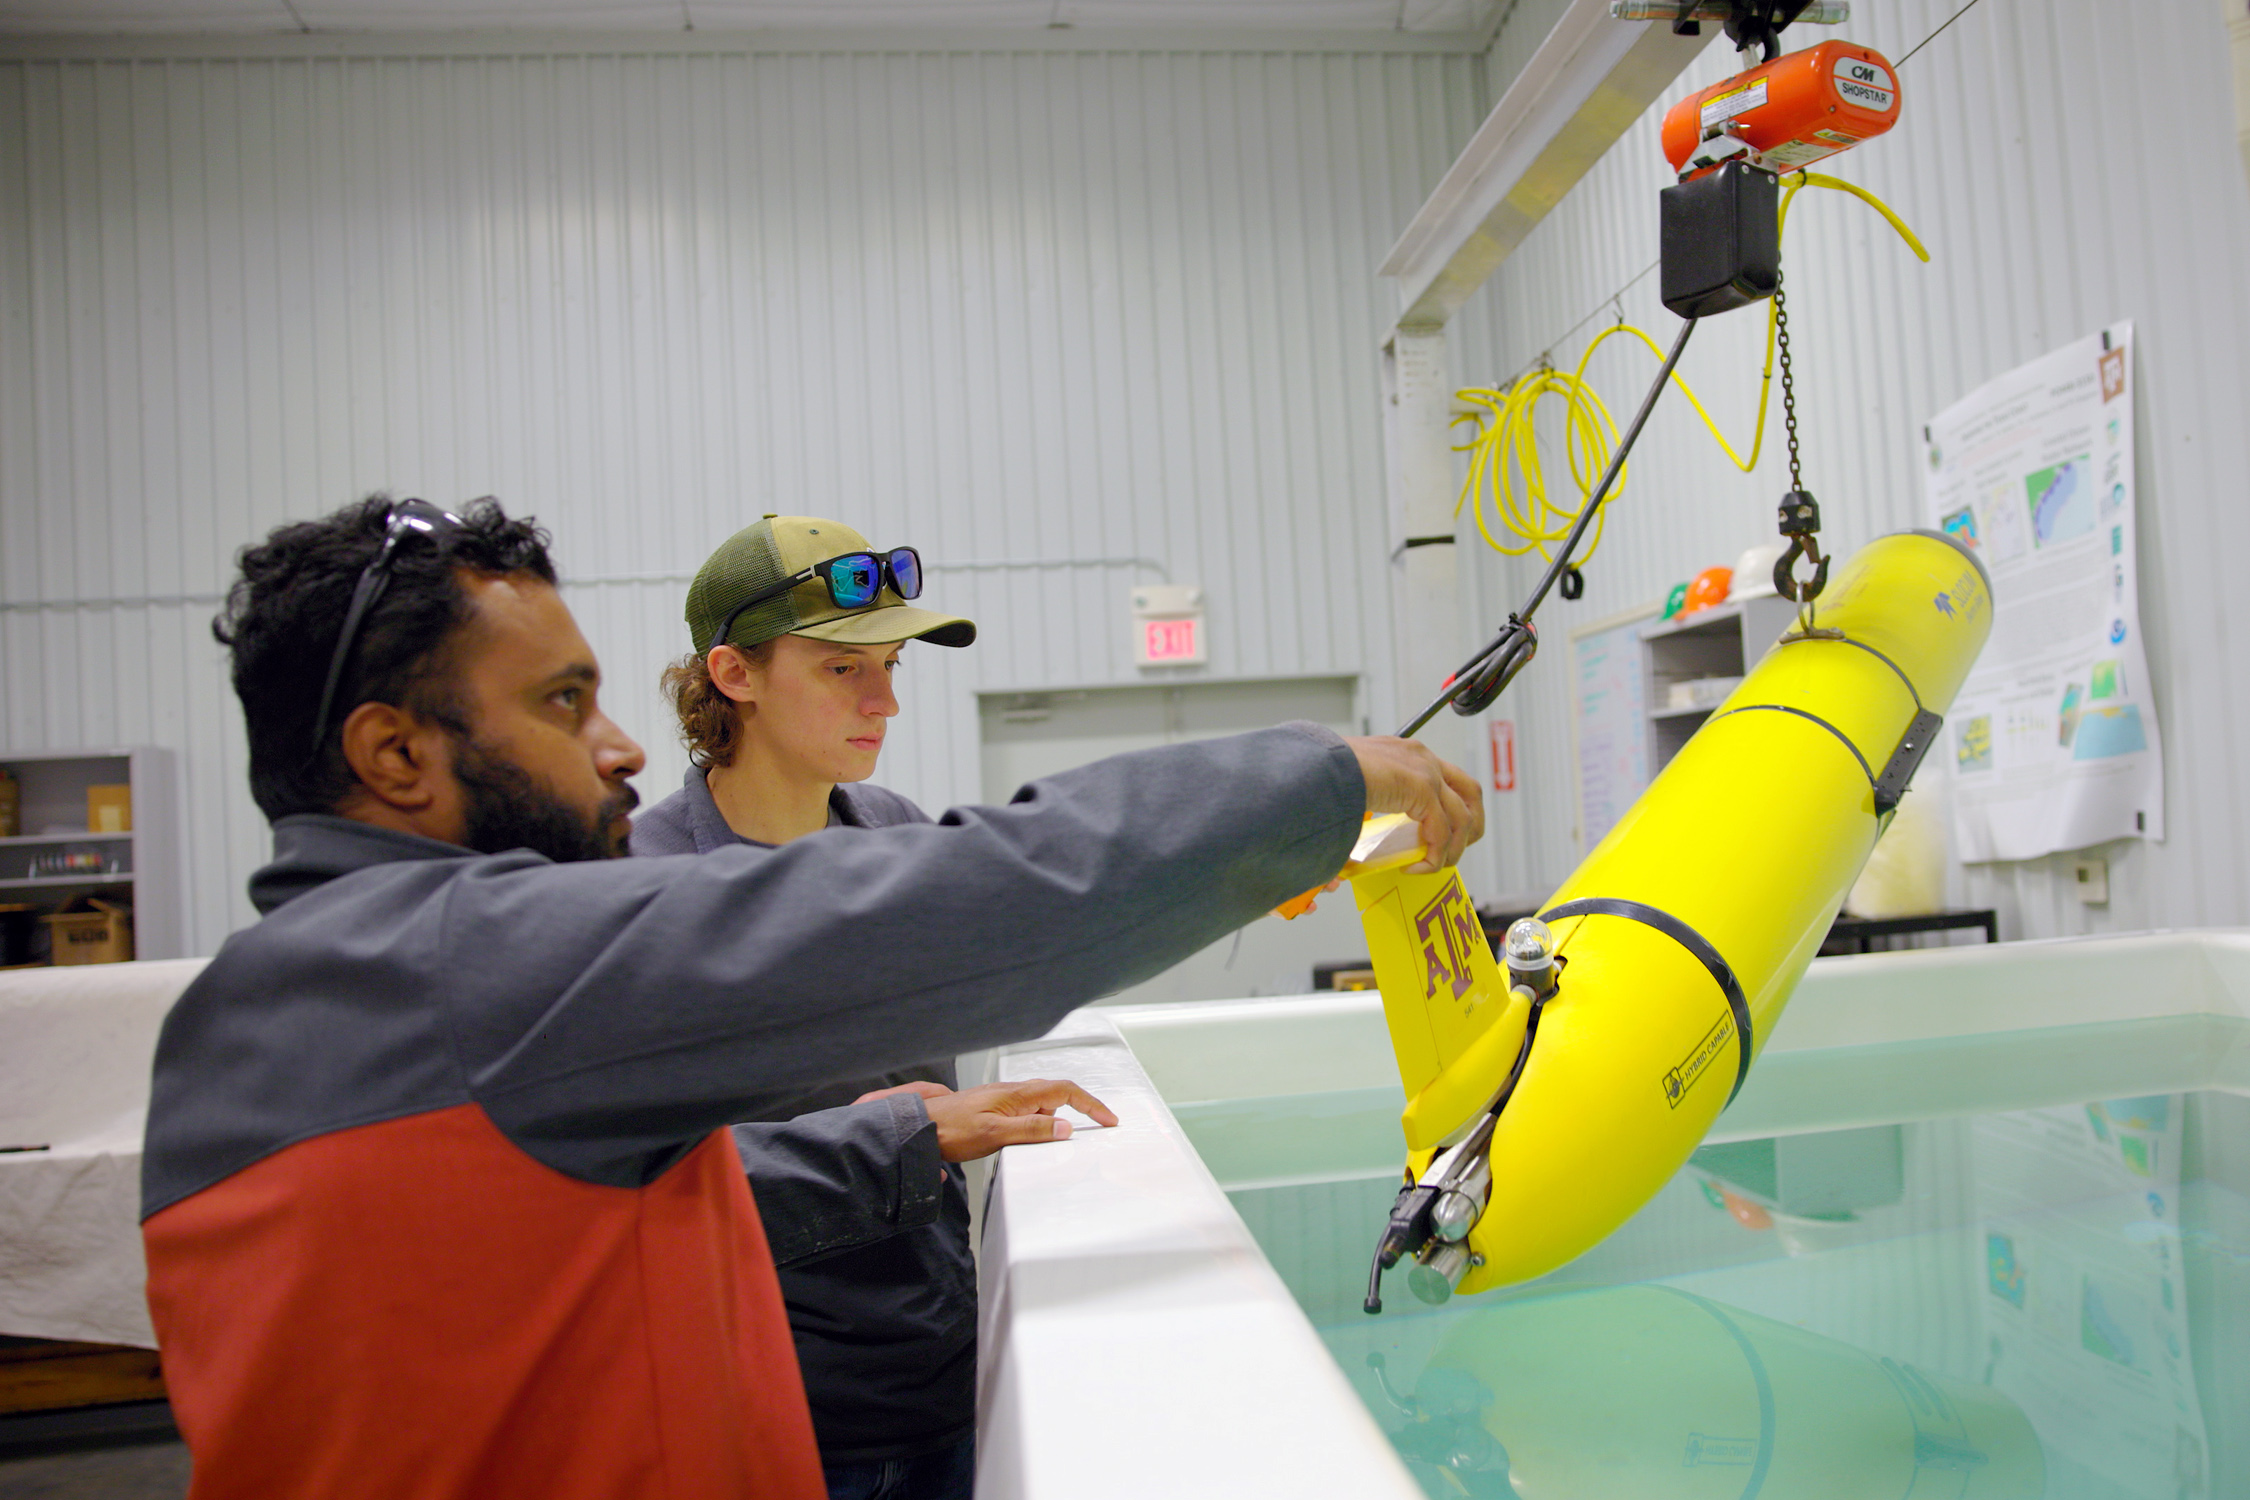 Two Geochemical and Environmental Research Group members observe a yellow glider featuring a maroon Texas A&amp;M University logo as it floats in a pool within the GERG laboratory